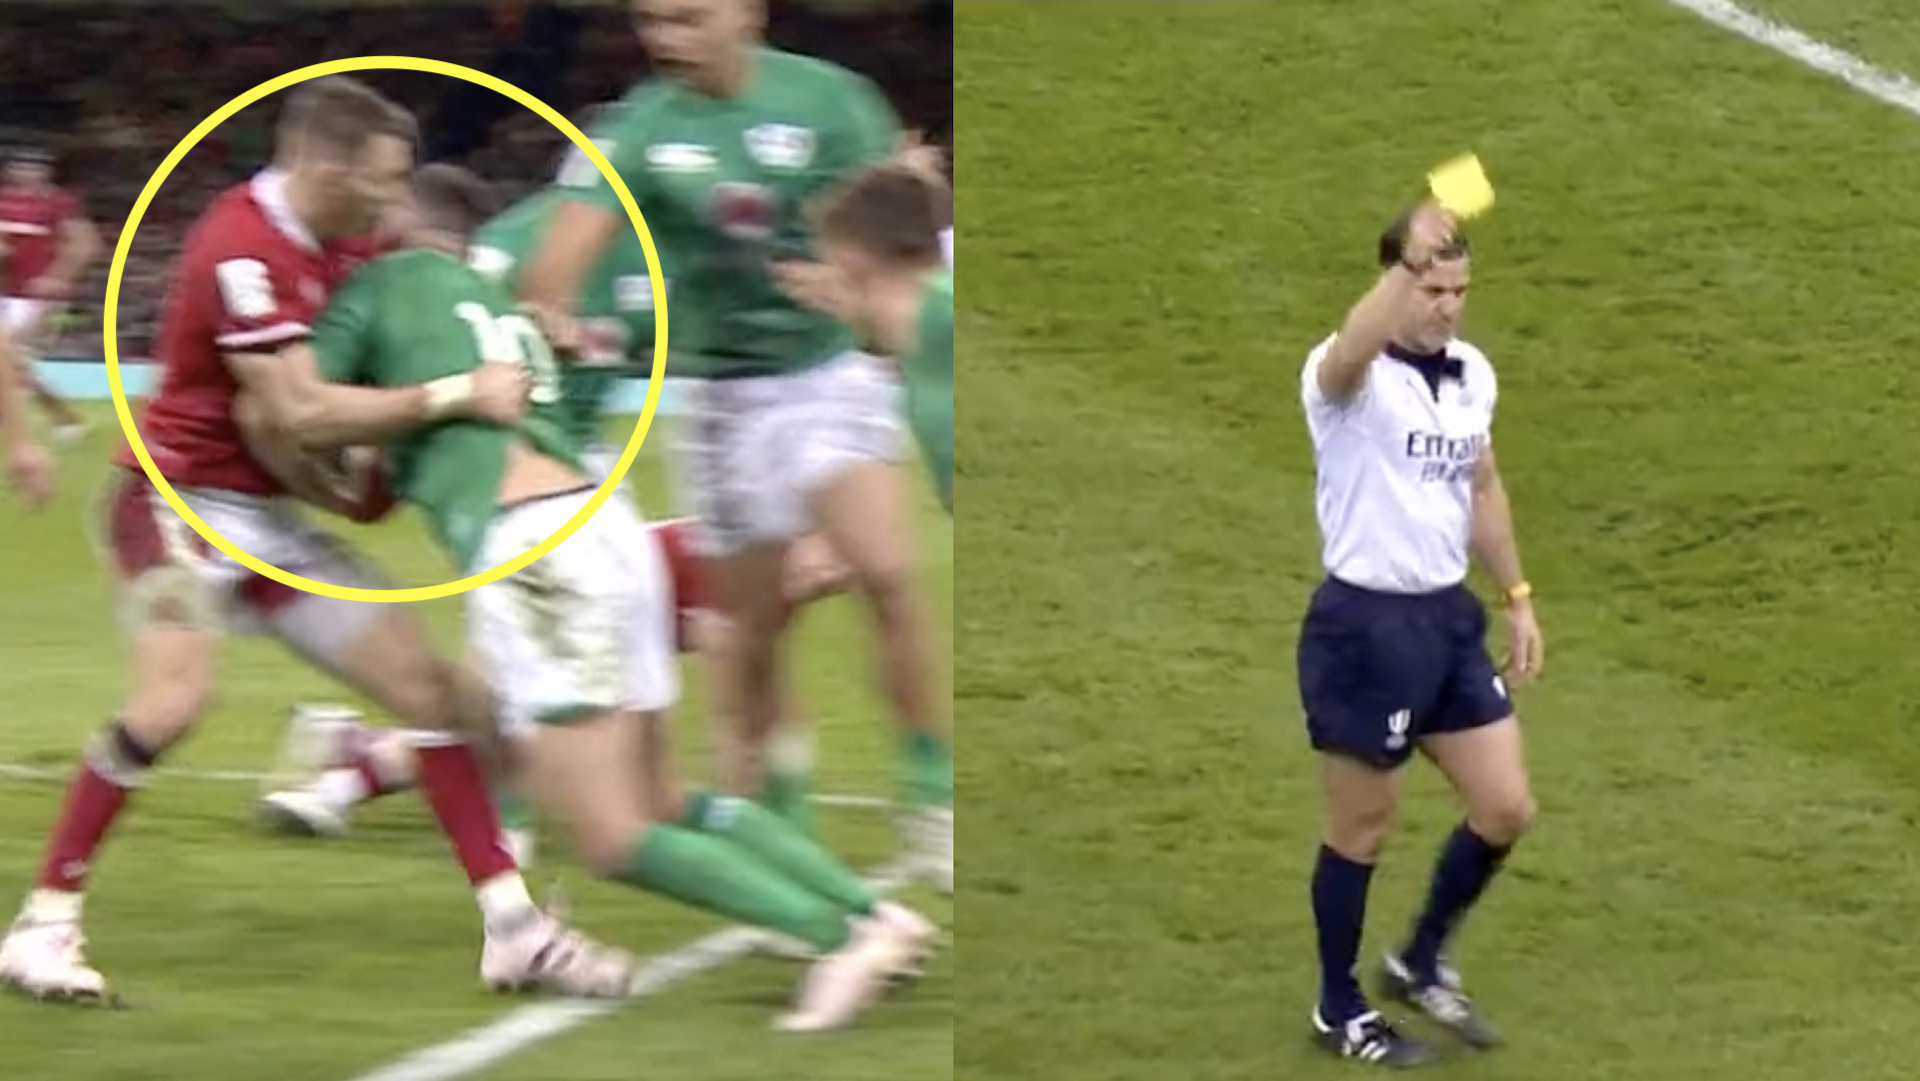 New footage proves Sexton milked yellow card in ultimate move of gamesmanship